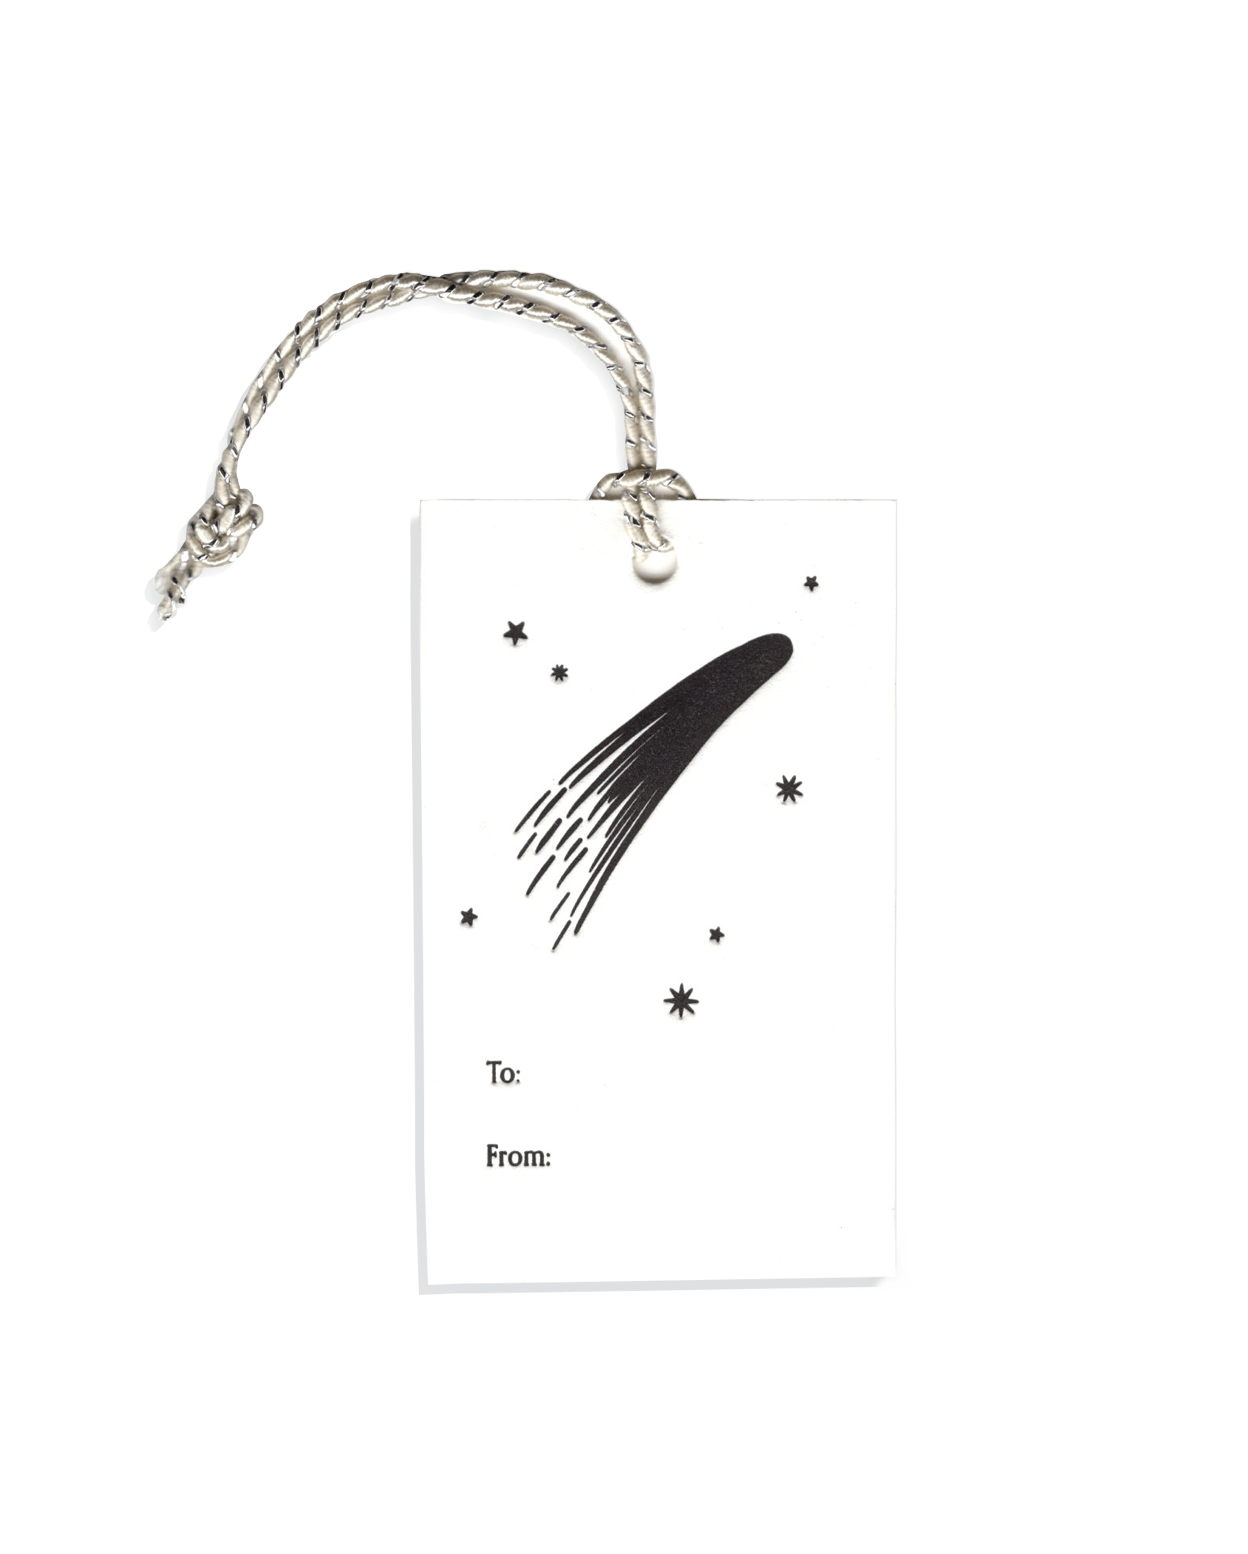 A single letterpressed gift tag with black comets, stars, and the words "to" and "from" in black ink on cream card stock with a silver tie on top.